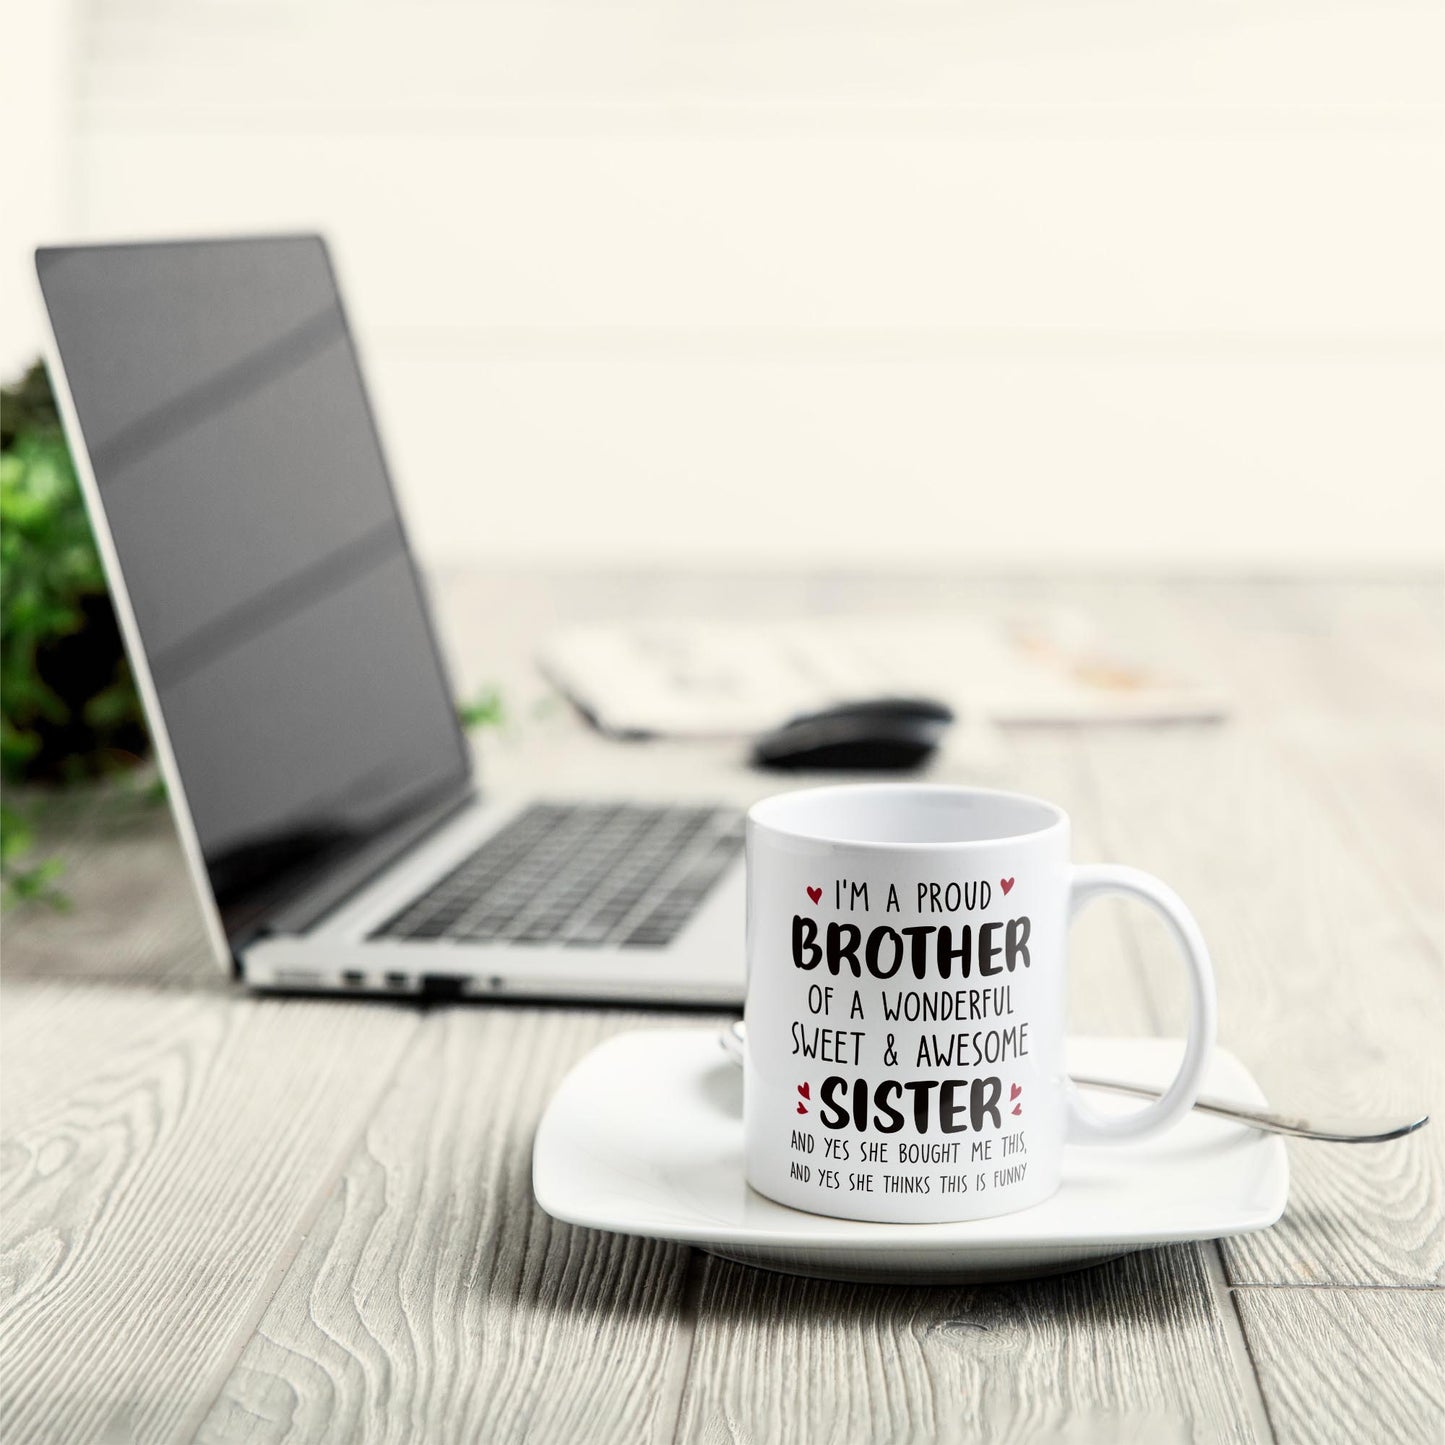 Proud Brother Of A Wonderful & Sweet Sister - Personalized Mug - Birthday Gift For Brothers, Sistersc